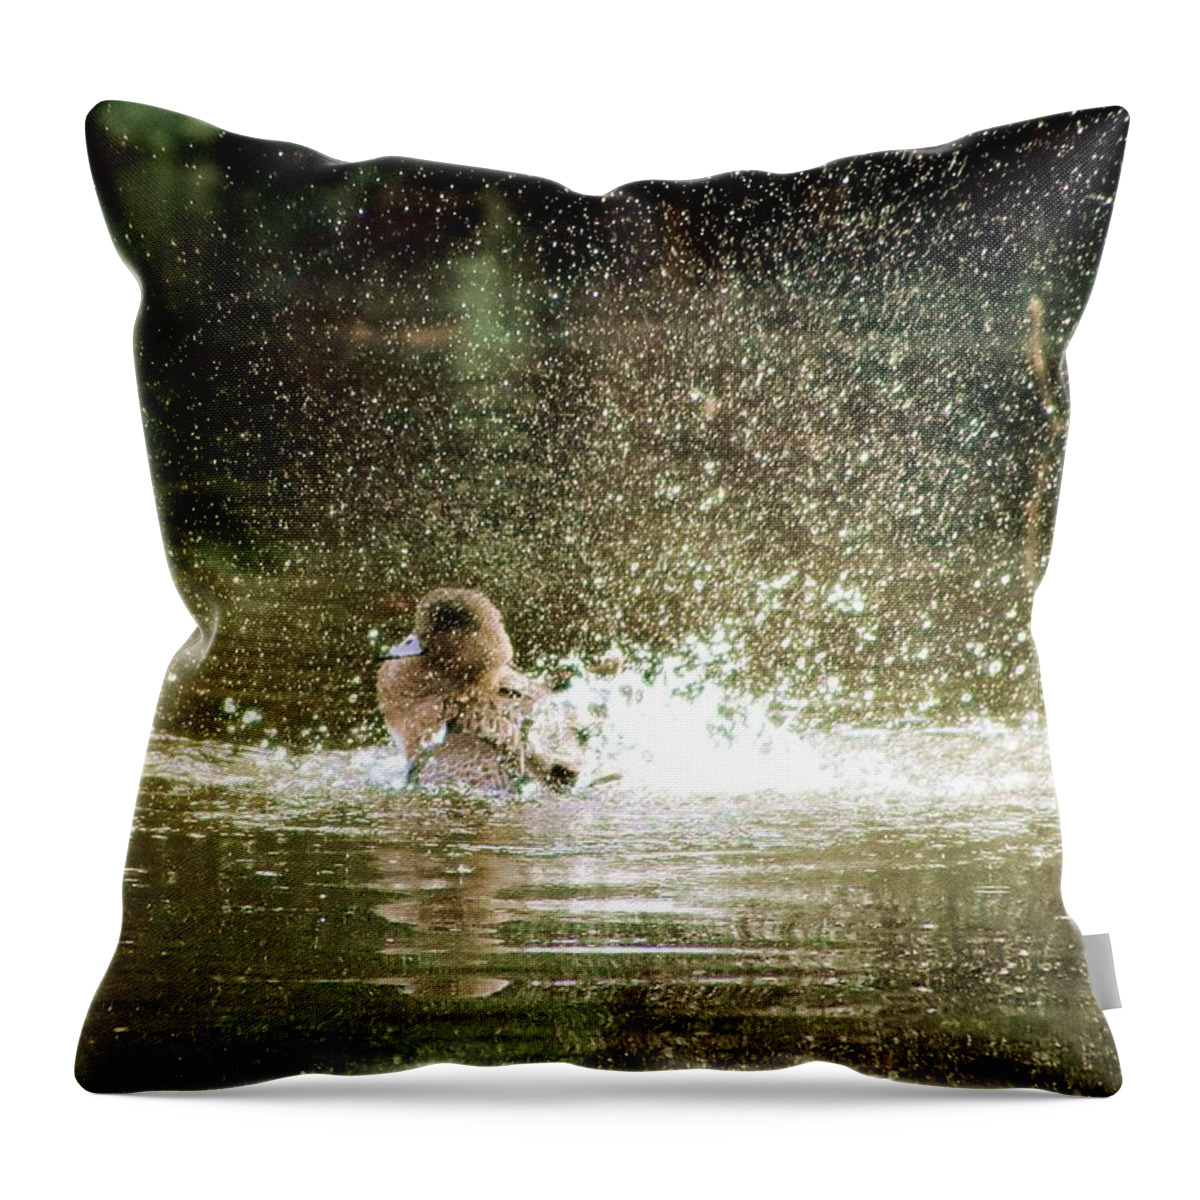 Widgeon Throw Pillow featuring the photograph Widgeon Washup by Kimberly Furey